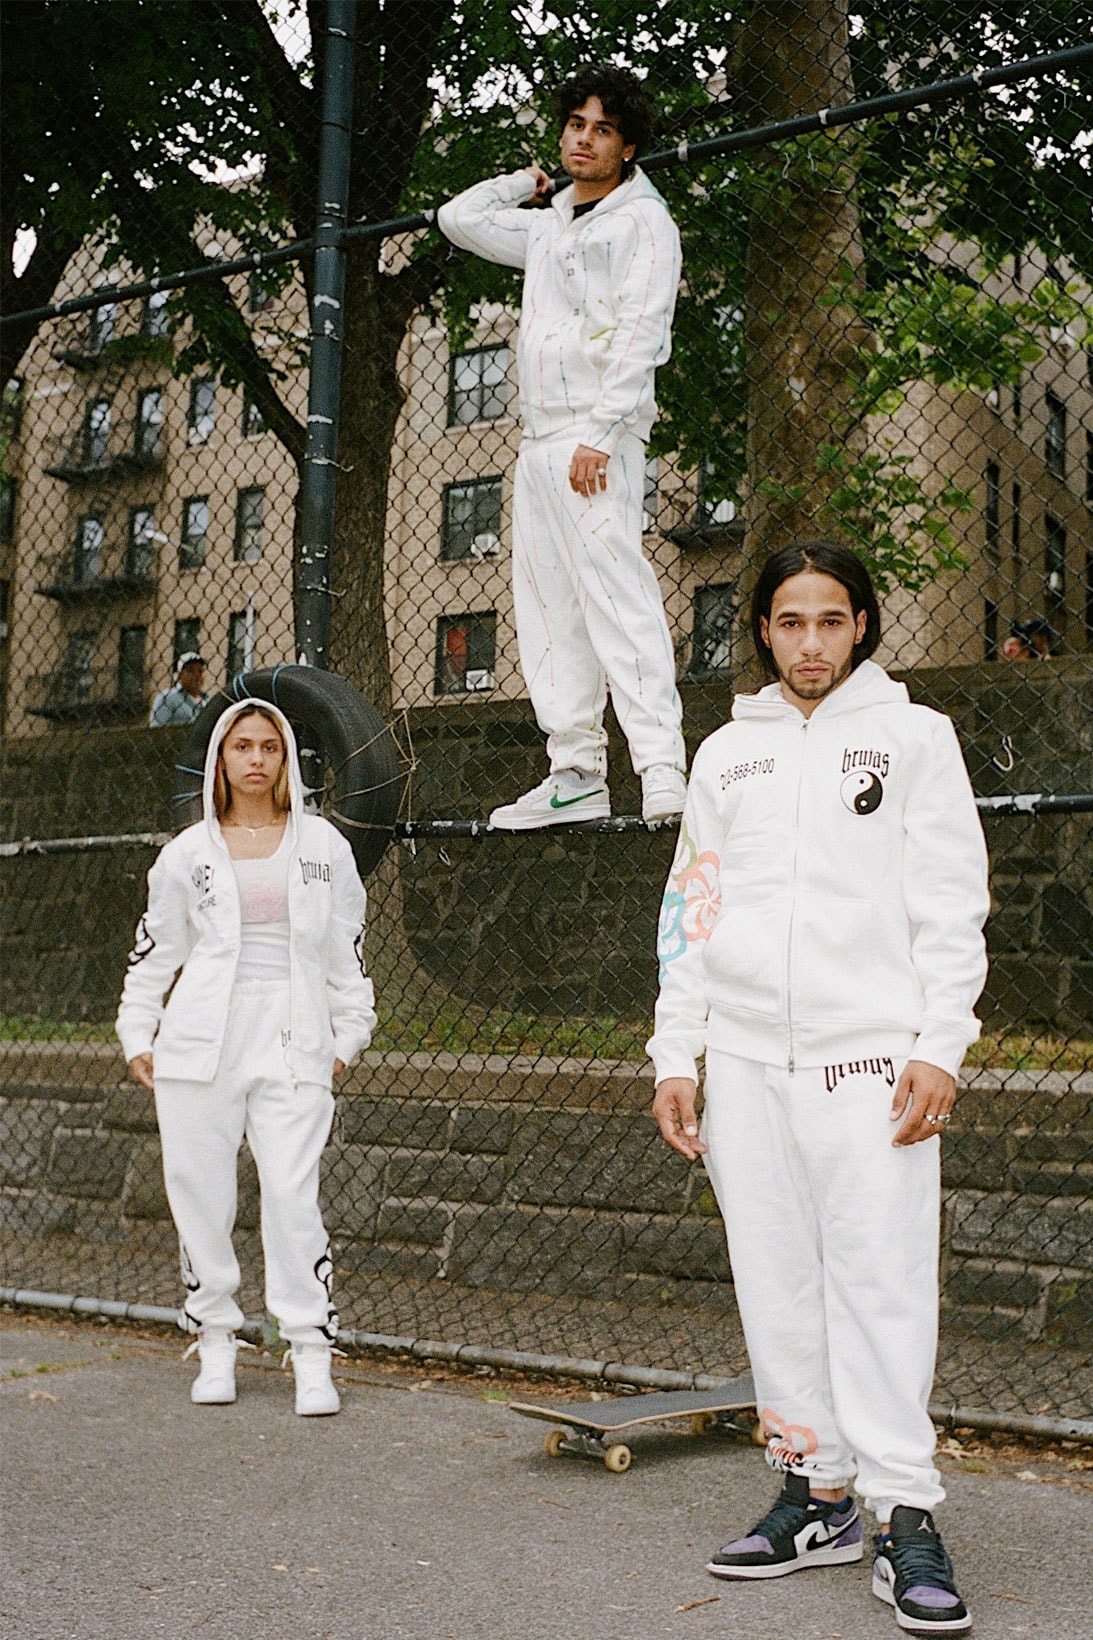 BRUJAS "WORLD SHINE" Collection white sweatsuit acupuncture ying yang